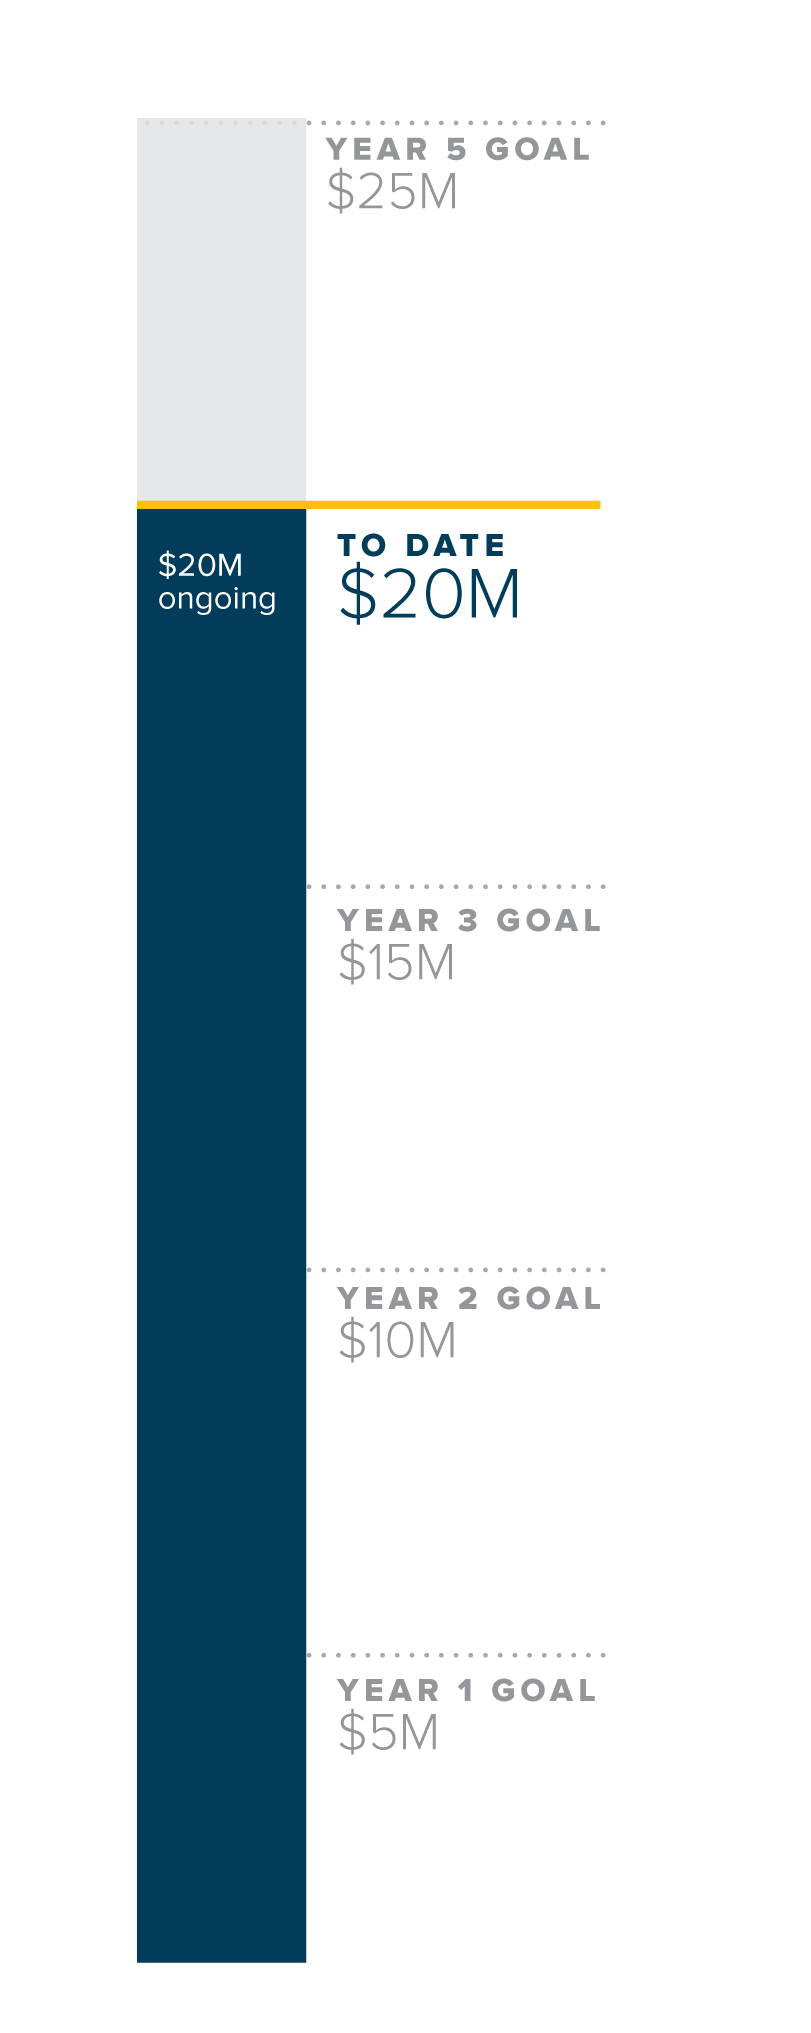 Central Campus Savings Target thermometer graphic. $20 million raised to date, of which $20 million is ongoing